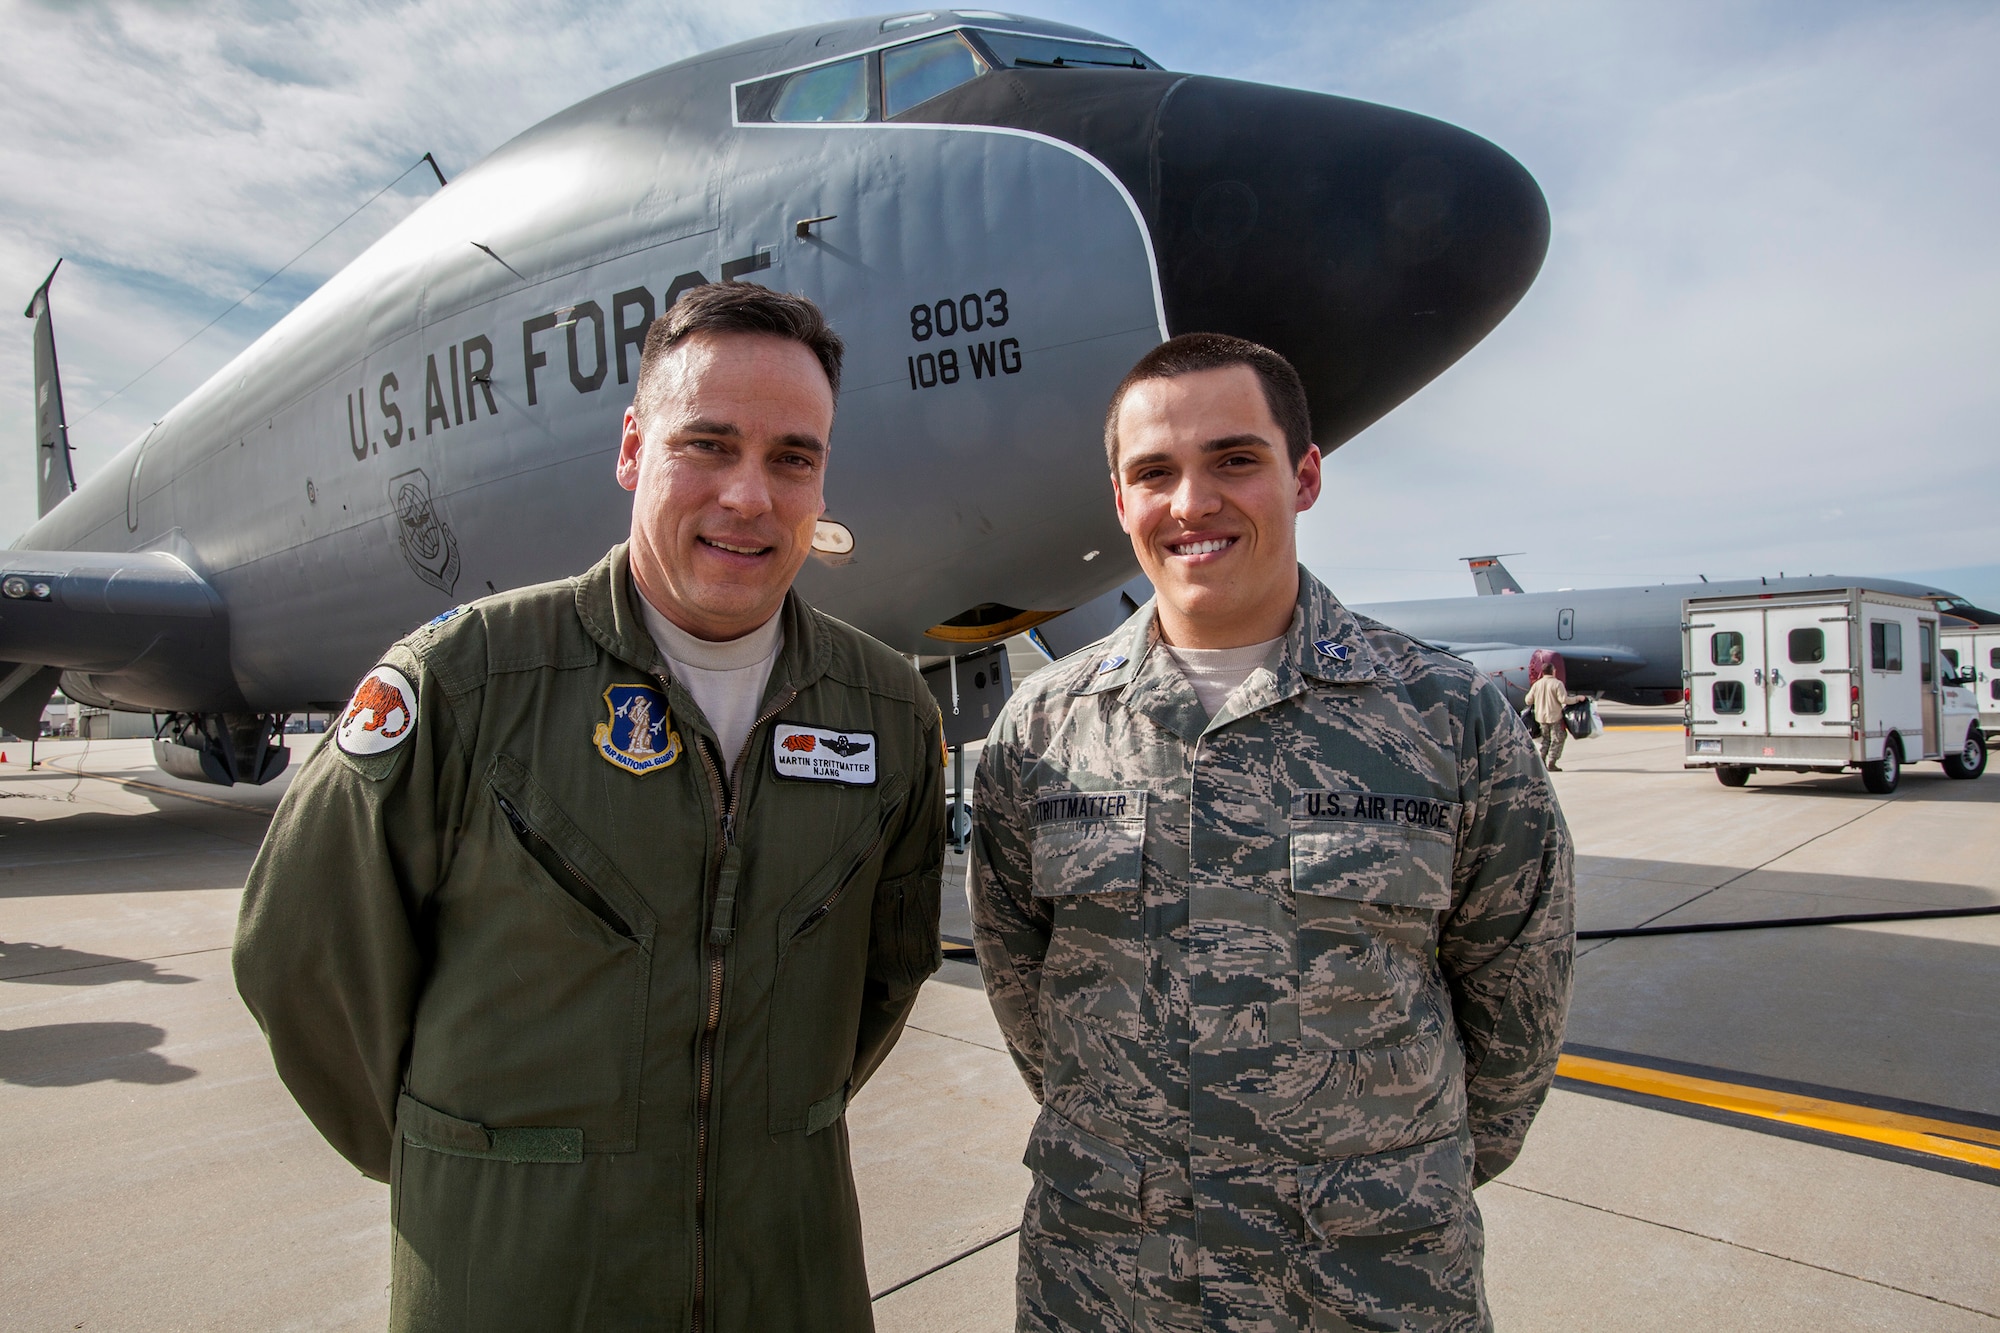 Lt. Col. Martin Strittmatter, left, 108th Wing pilot, and his son, Nick, pose for a photo in front of the KC-135 Stratotanker after the air refueling mission April 2, 2014. Nick, a sophmore at St. Joseph's University in Philadelphia, Pa., was among the 25 Air Force ROTC cadets that were invited to observe the air refueling mission. (U.S. Air National Guard photo by Master Sgt. Mark C. Olsen/Released)